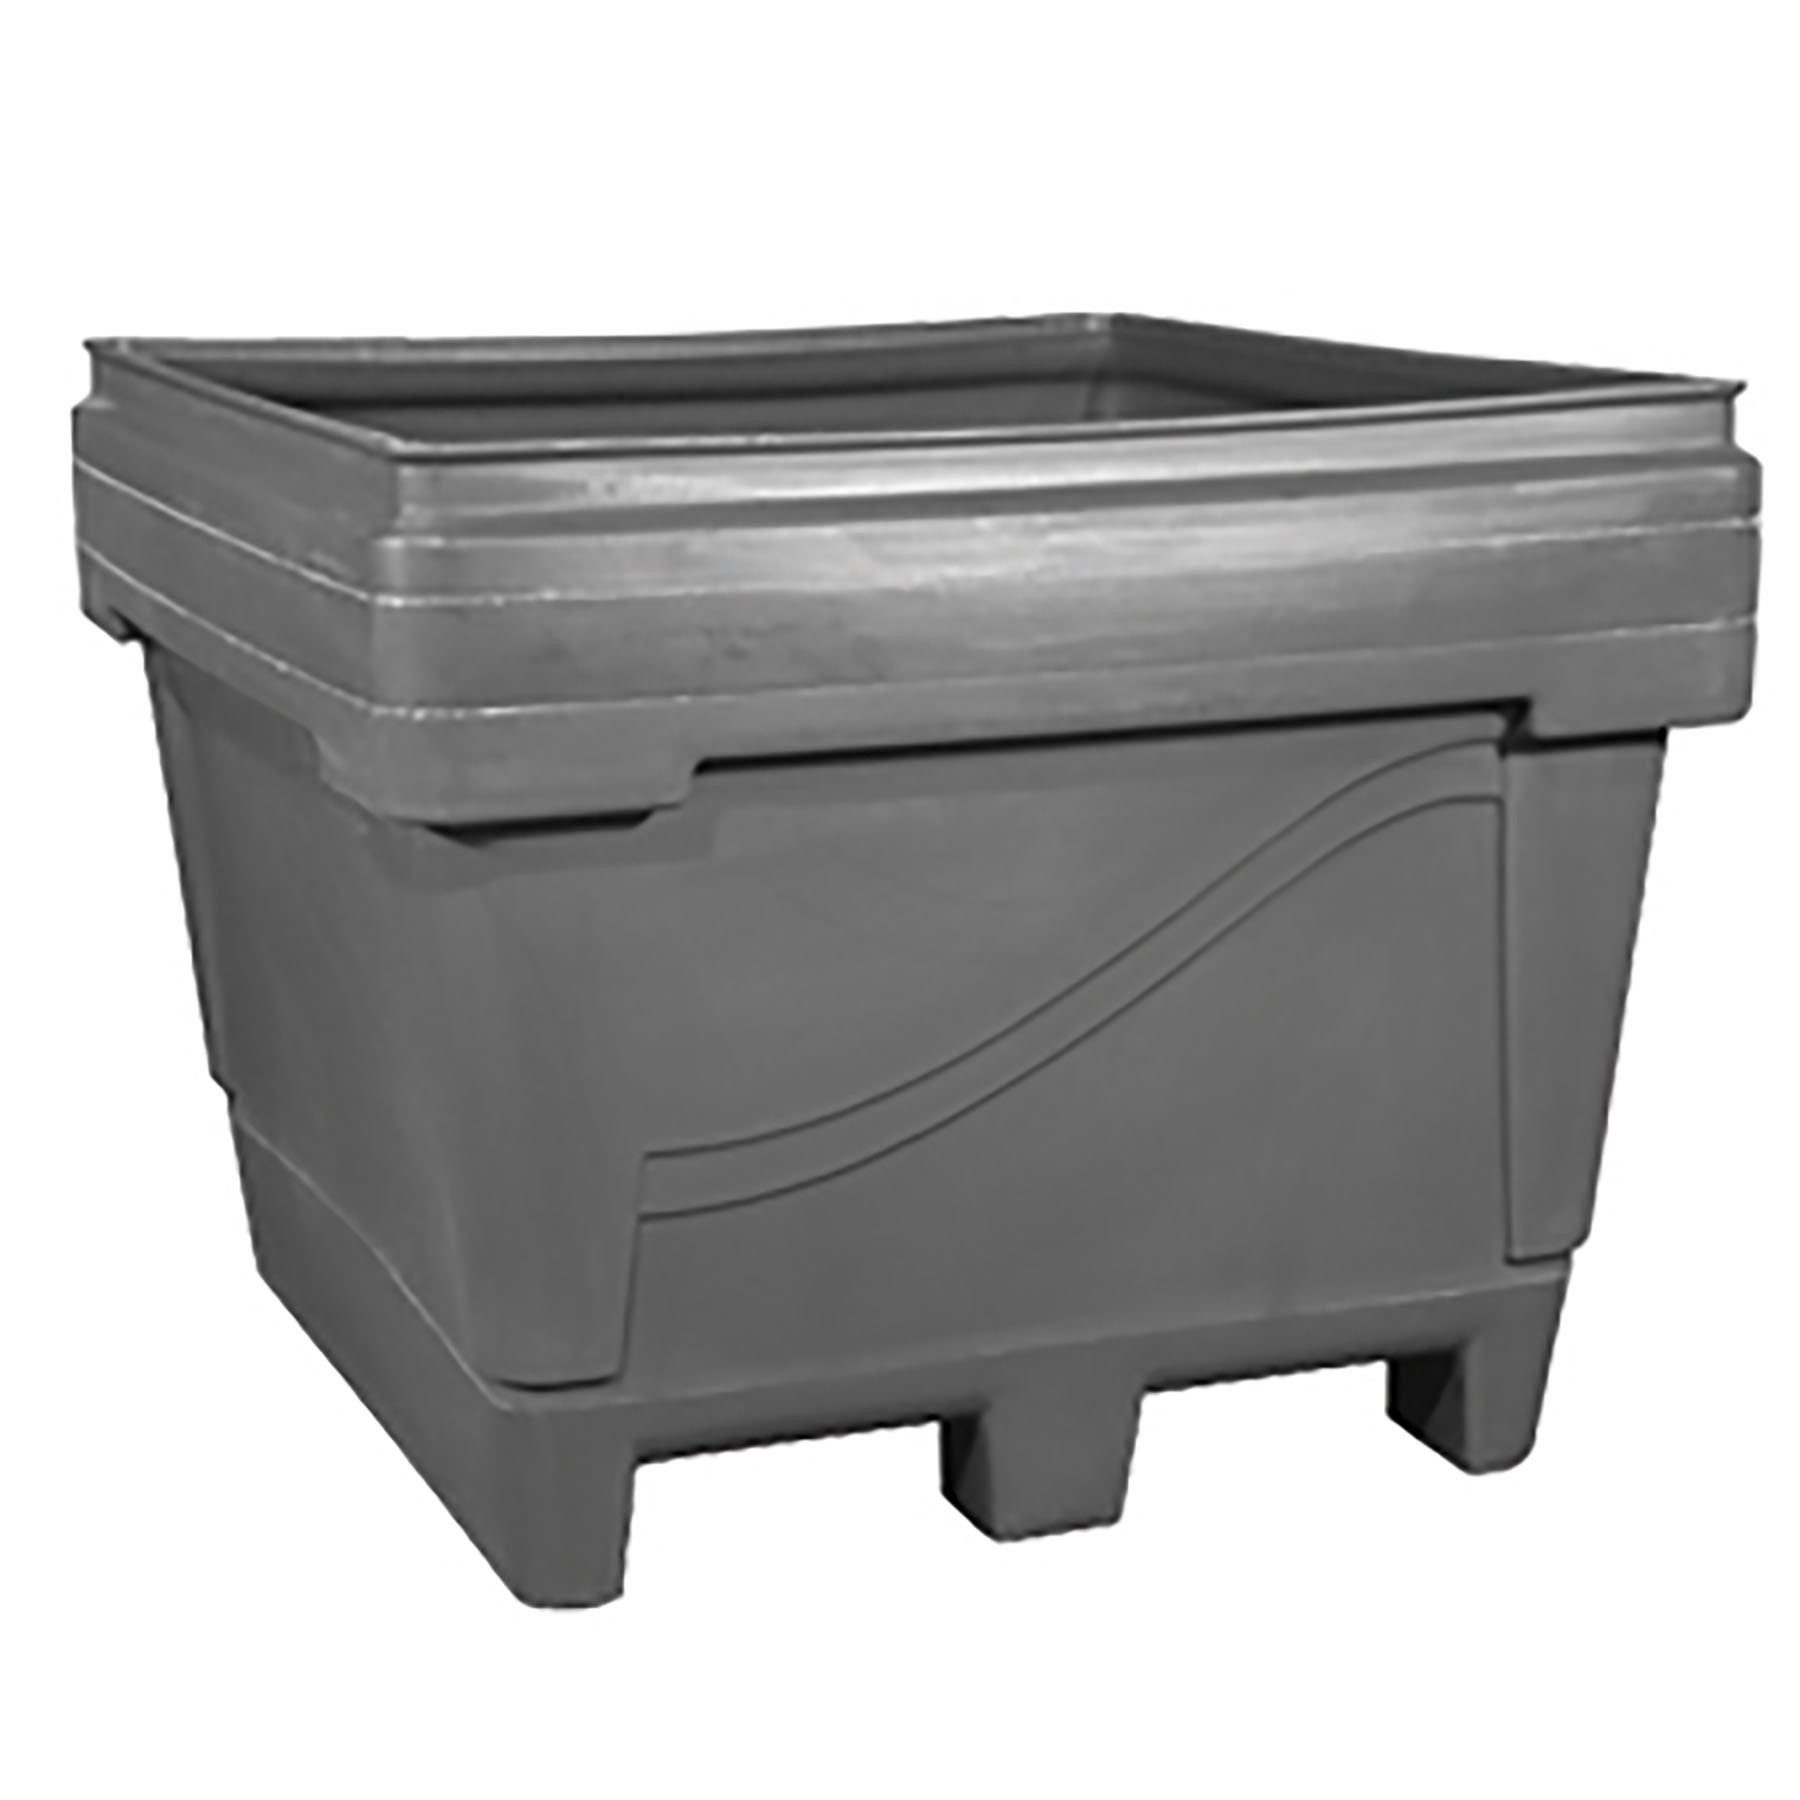 Ibc Totes Intermediate Bulk Containers The Cary Company for sizing 1800 X 1800